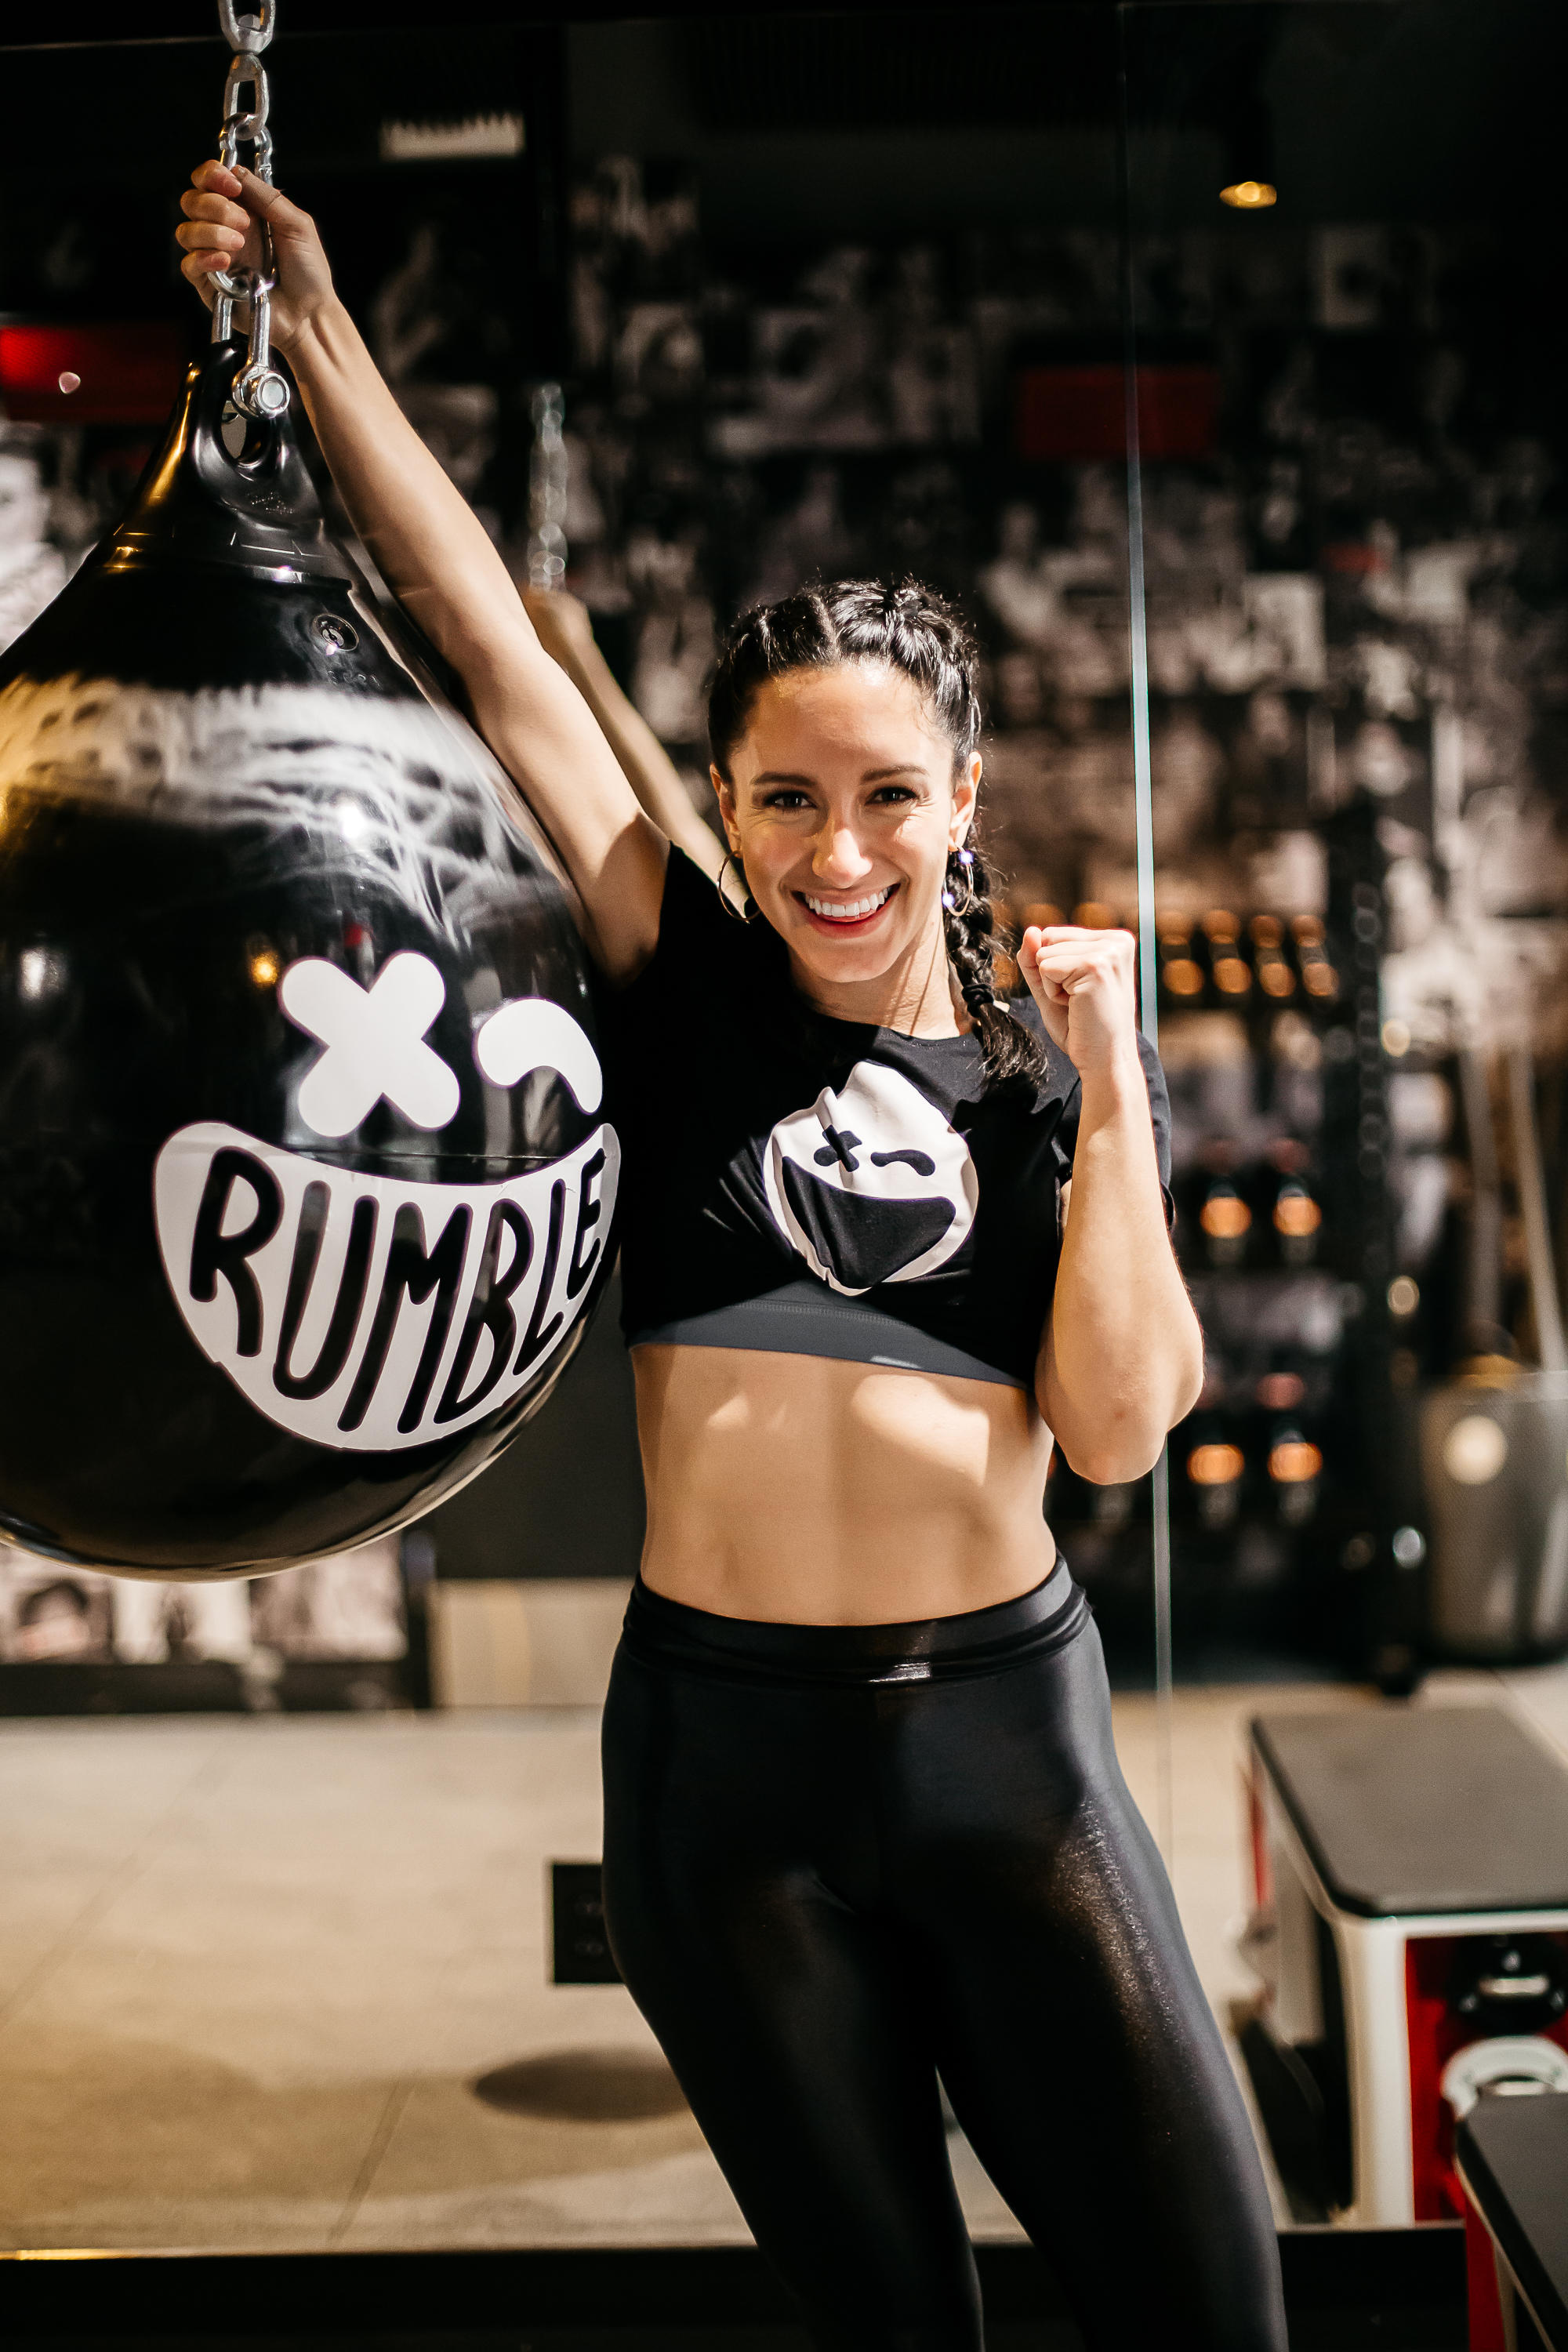 Boxing-inspired group fitness classes at Rumble Boxing.